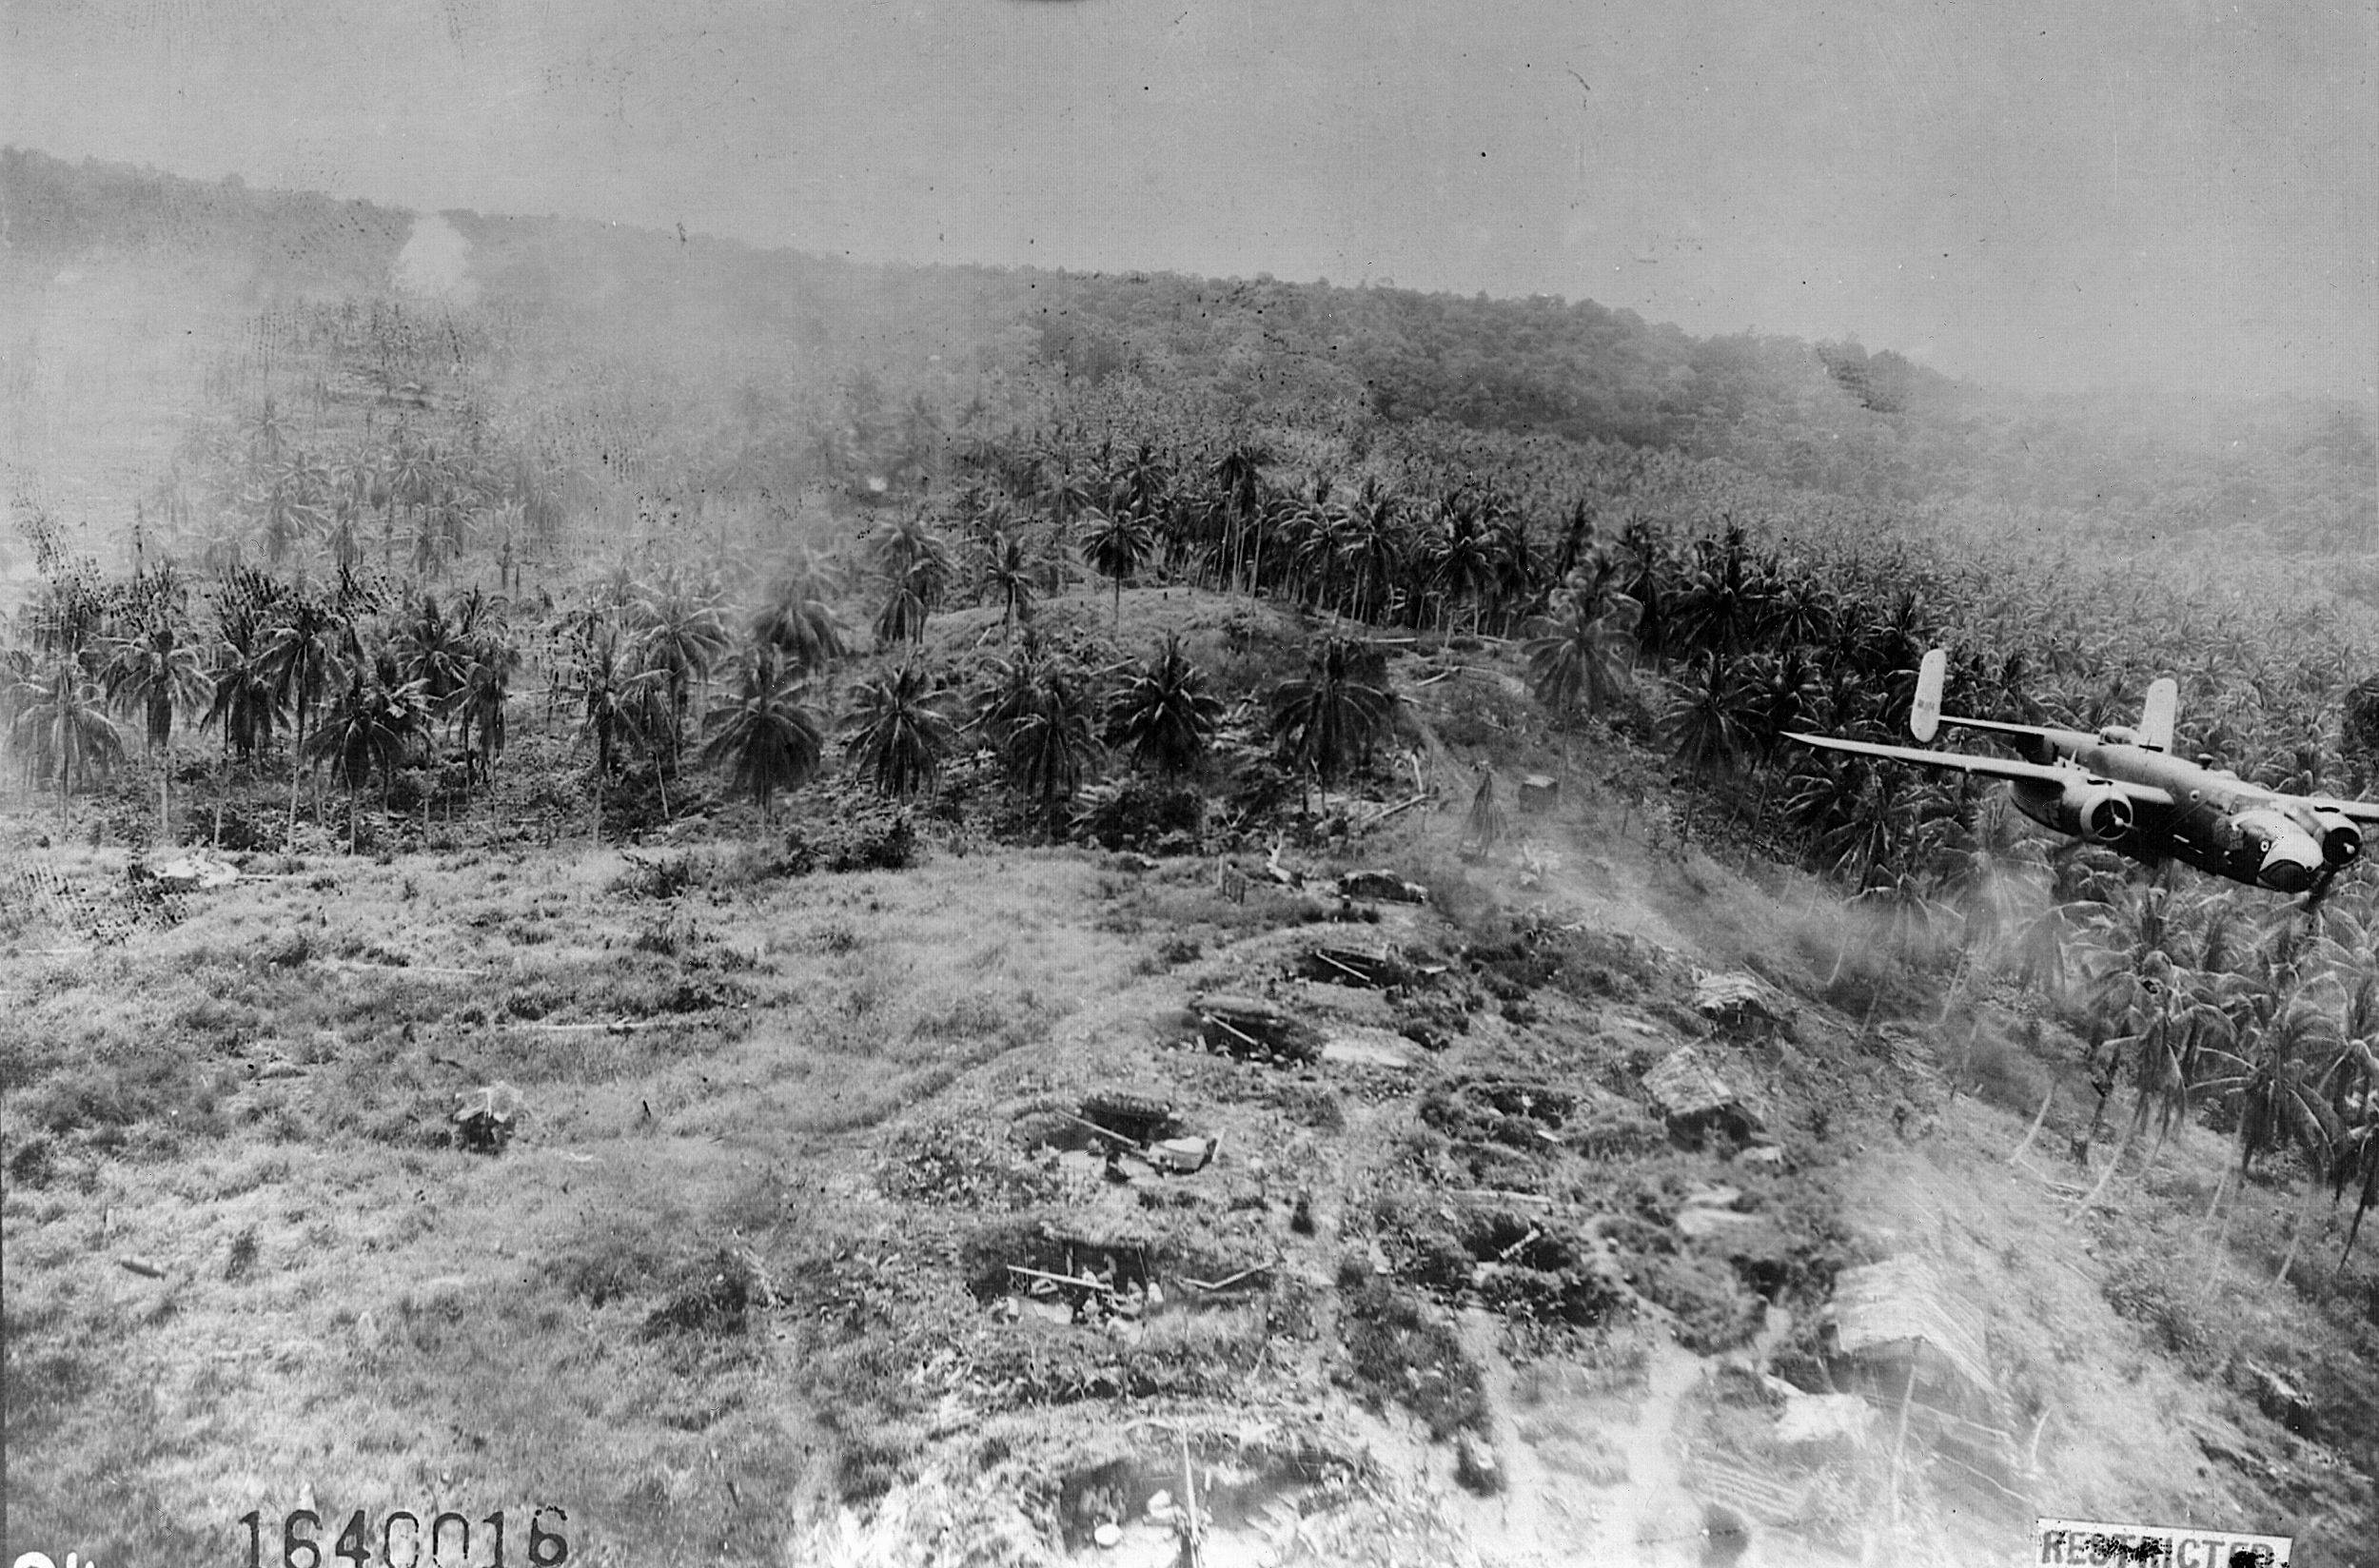 A B-25 crewman took this photo of a companion aircraft just above the New Guinea treetops—and an enemy antiaircraft emplacement—in January 1944.